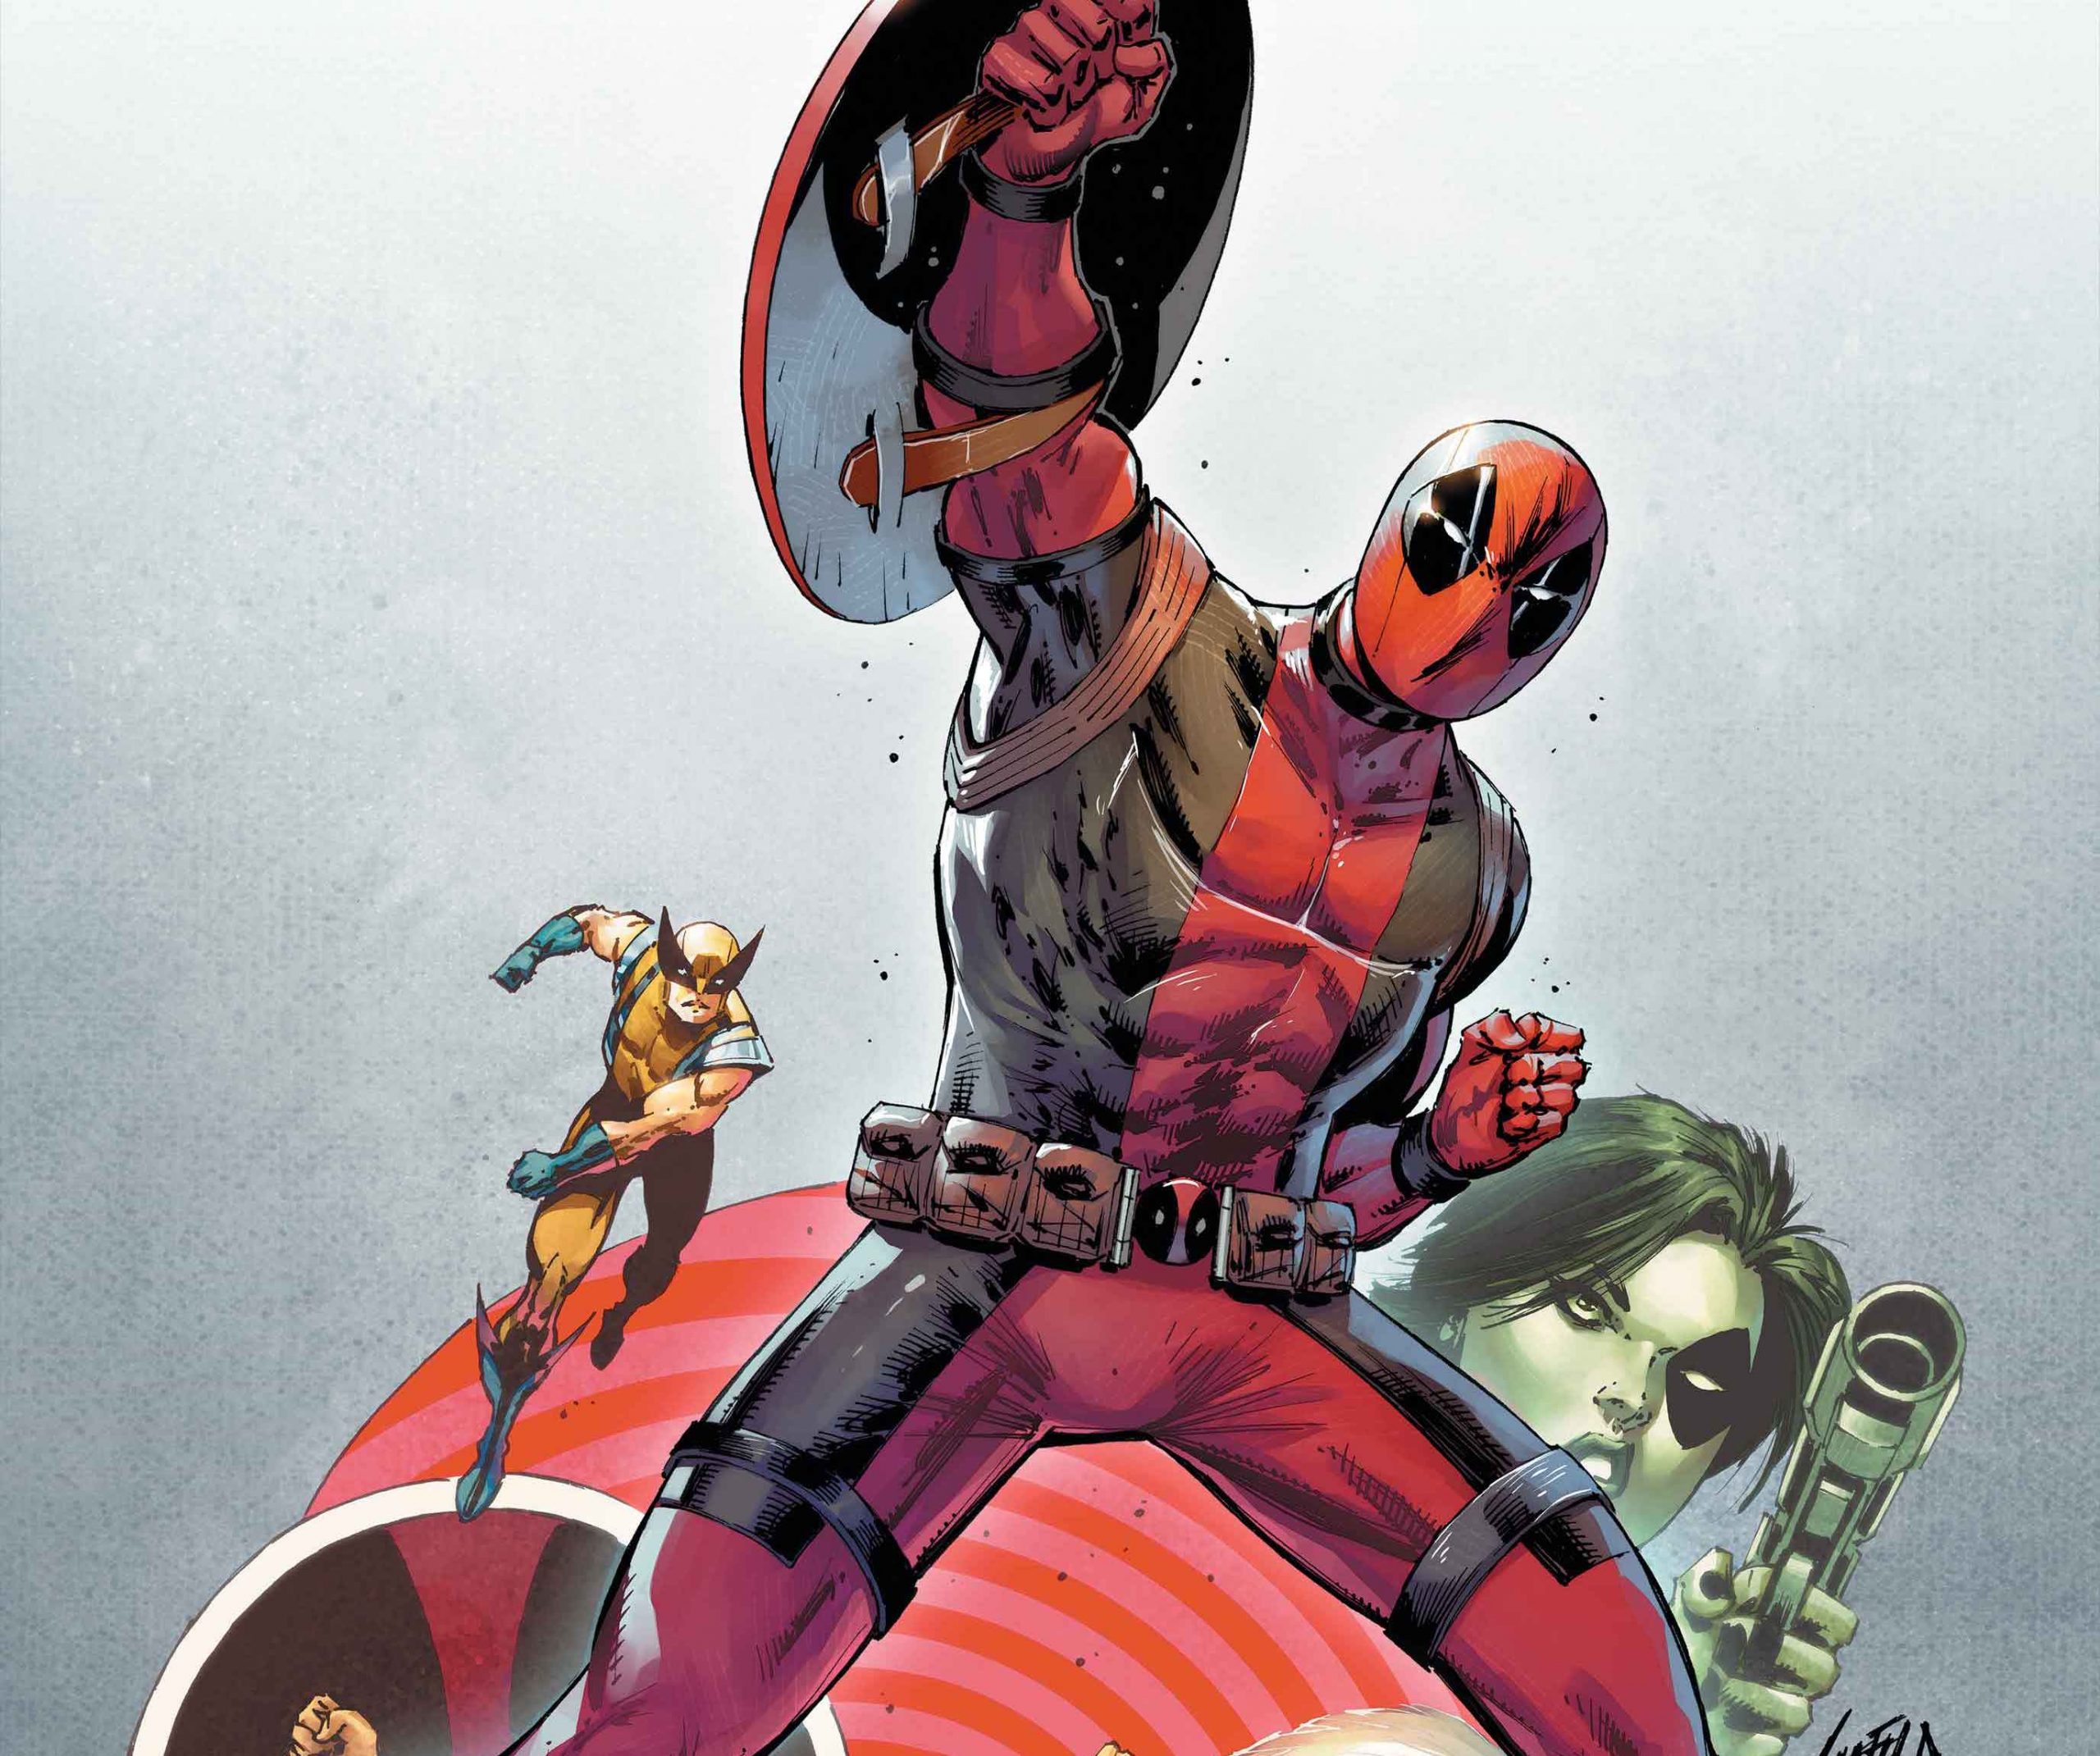 New Rob Liefeld Deadpool homage variant covers celebrate comics greats